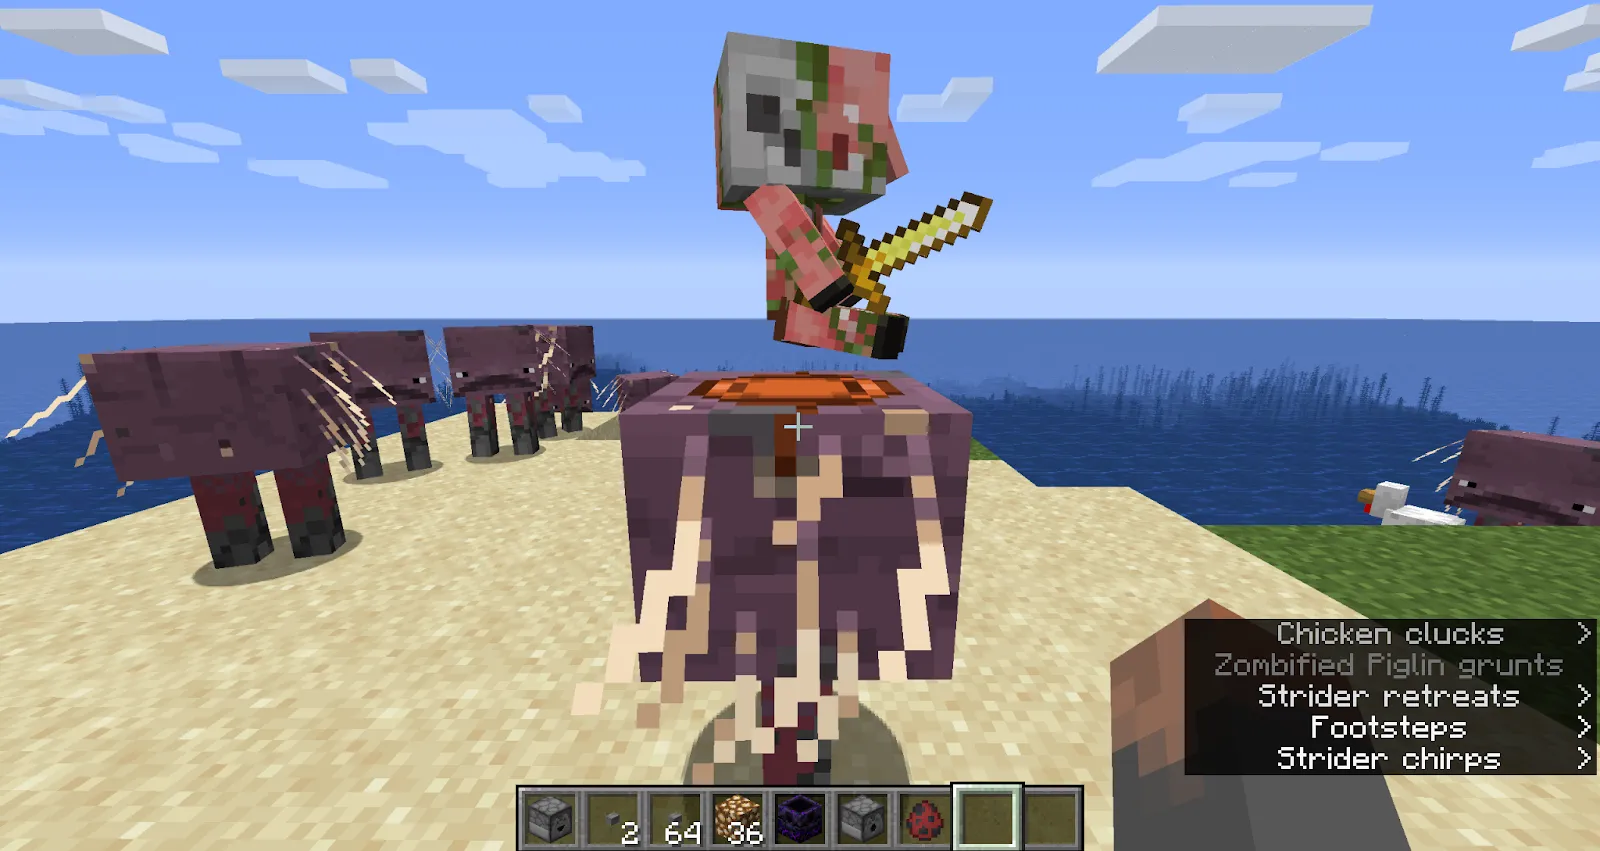 Image of a zombie piglin riding a strider in Minecraft